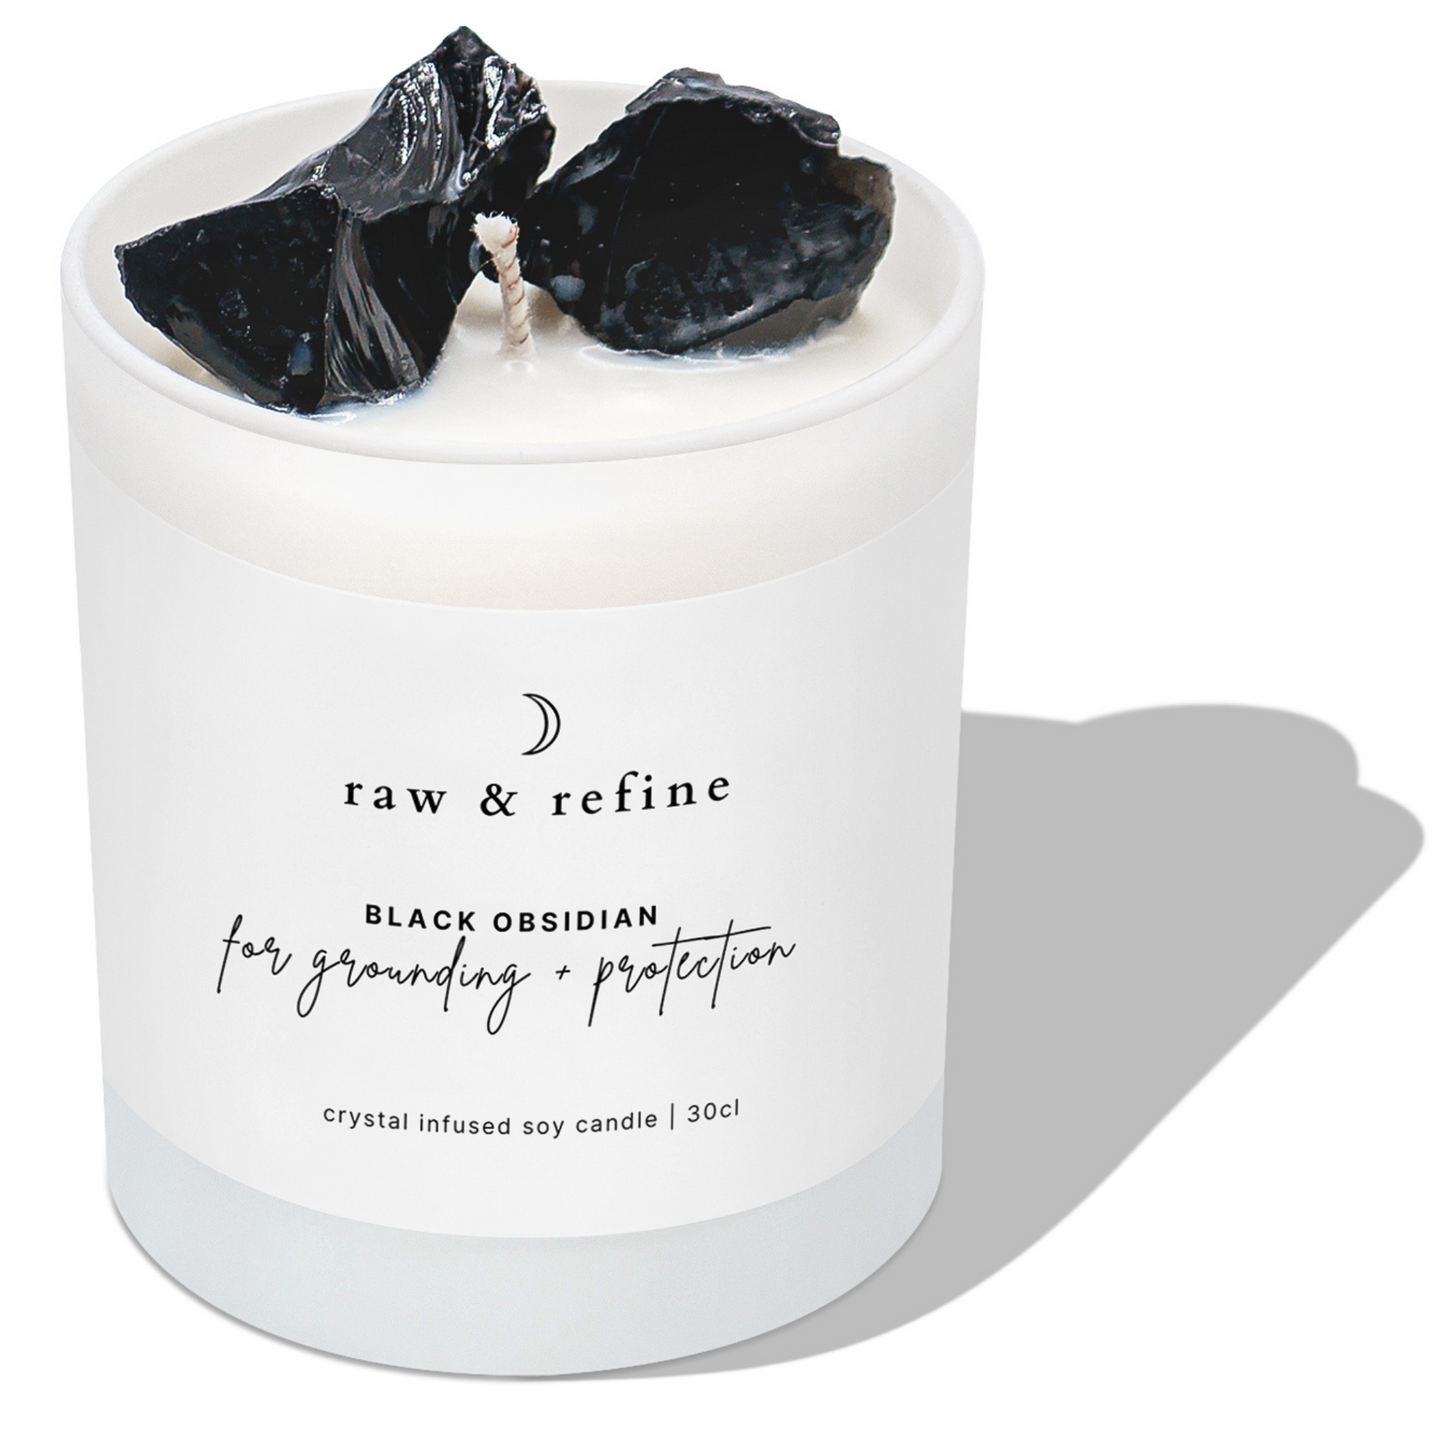 Black Obsidian Candle - Grounding + Protection